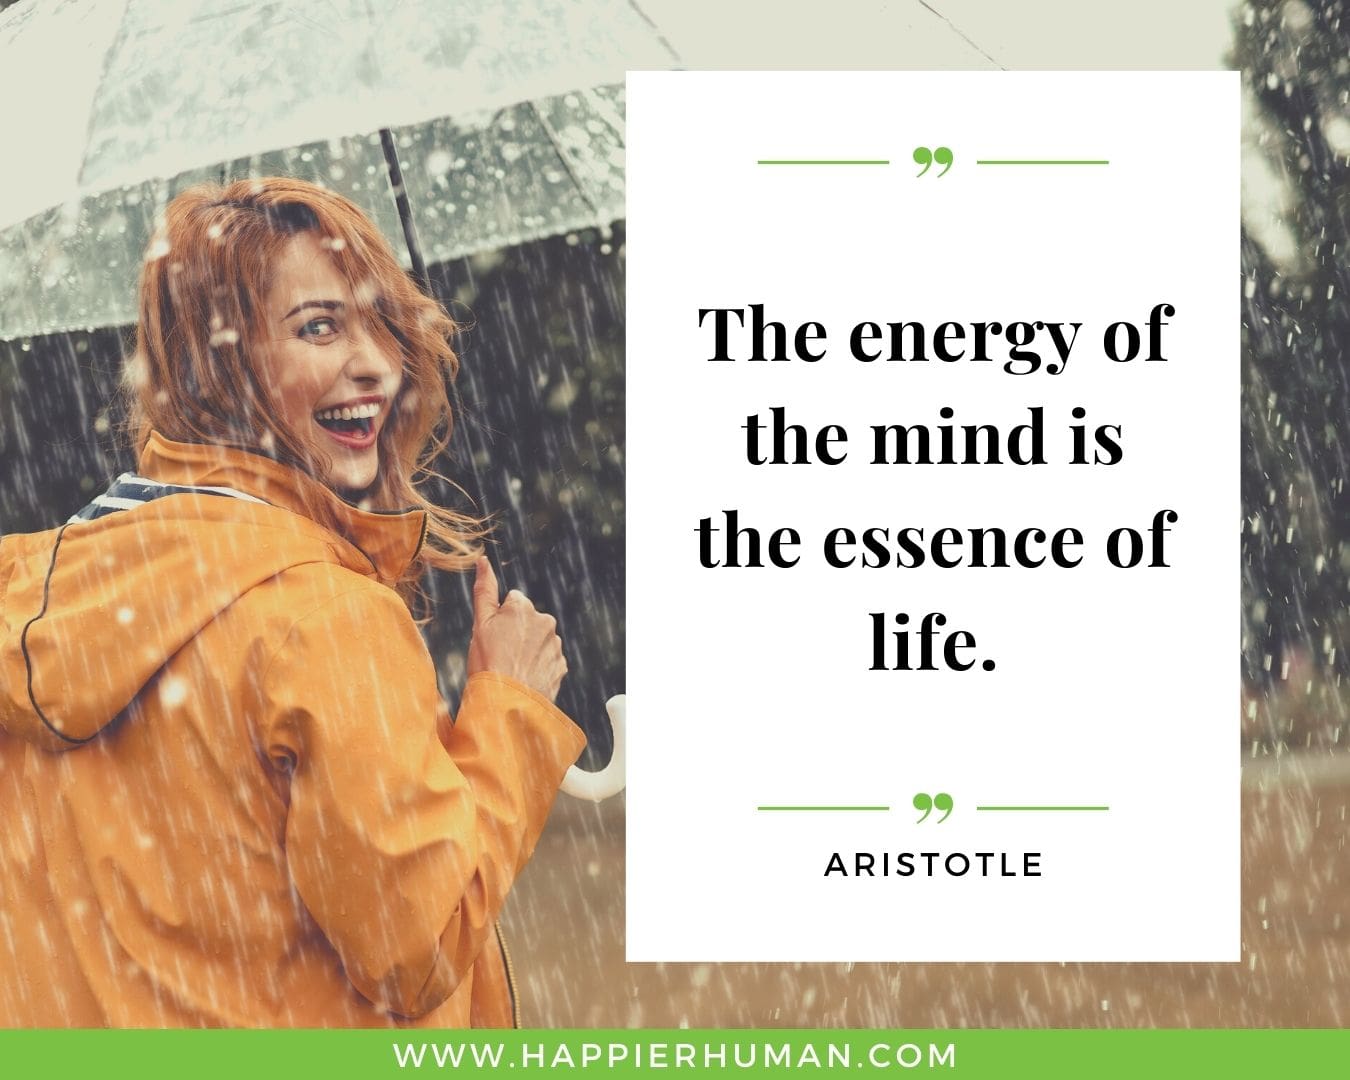 Positive Energy Quotes - “The energy of the mind is the essence of life.” - Aristotle